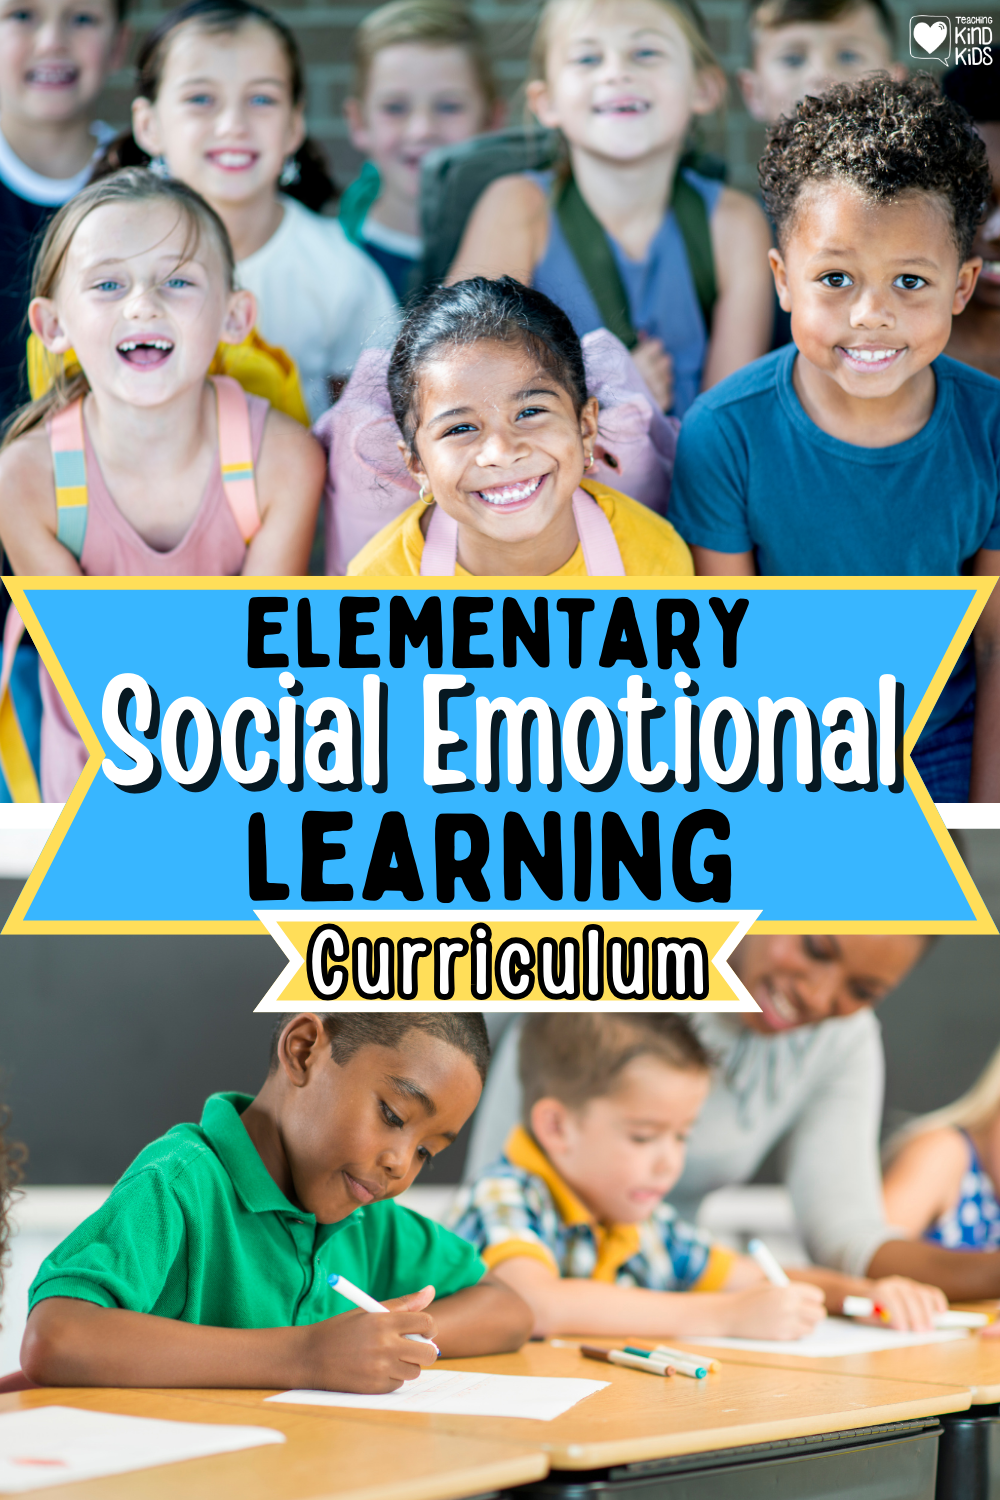 Use this social emotional learning curriculum to teach sel and kindness concepts to elementary school students.